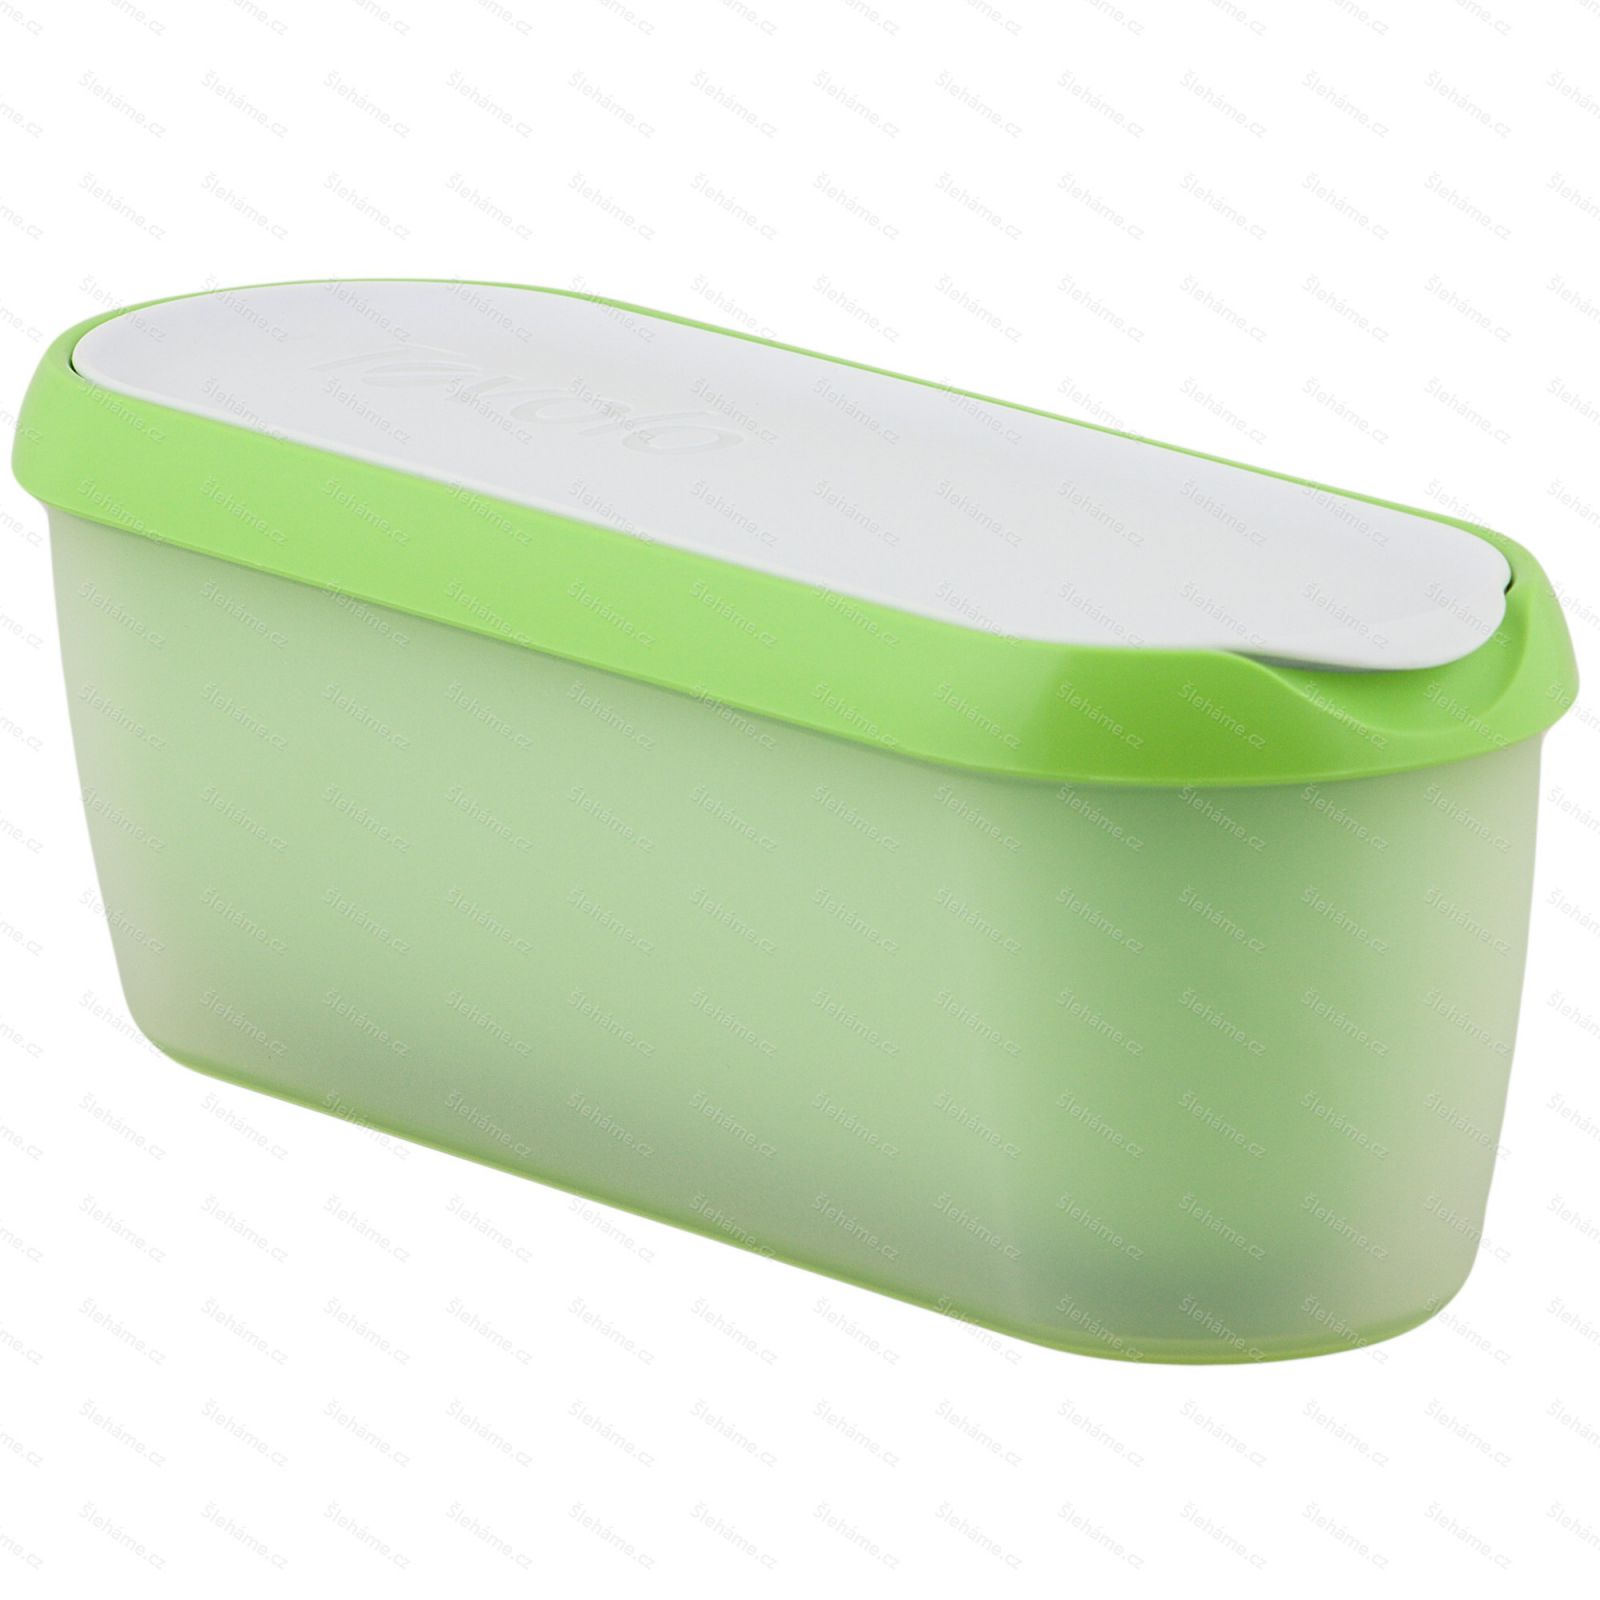 Ice cream tub Tovolo GLIDE-A-SCOOP 1.4 l, pistachio - hlavní pohled